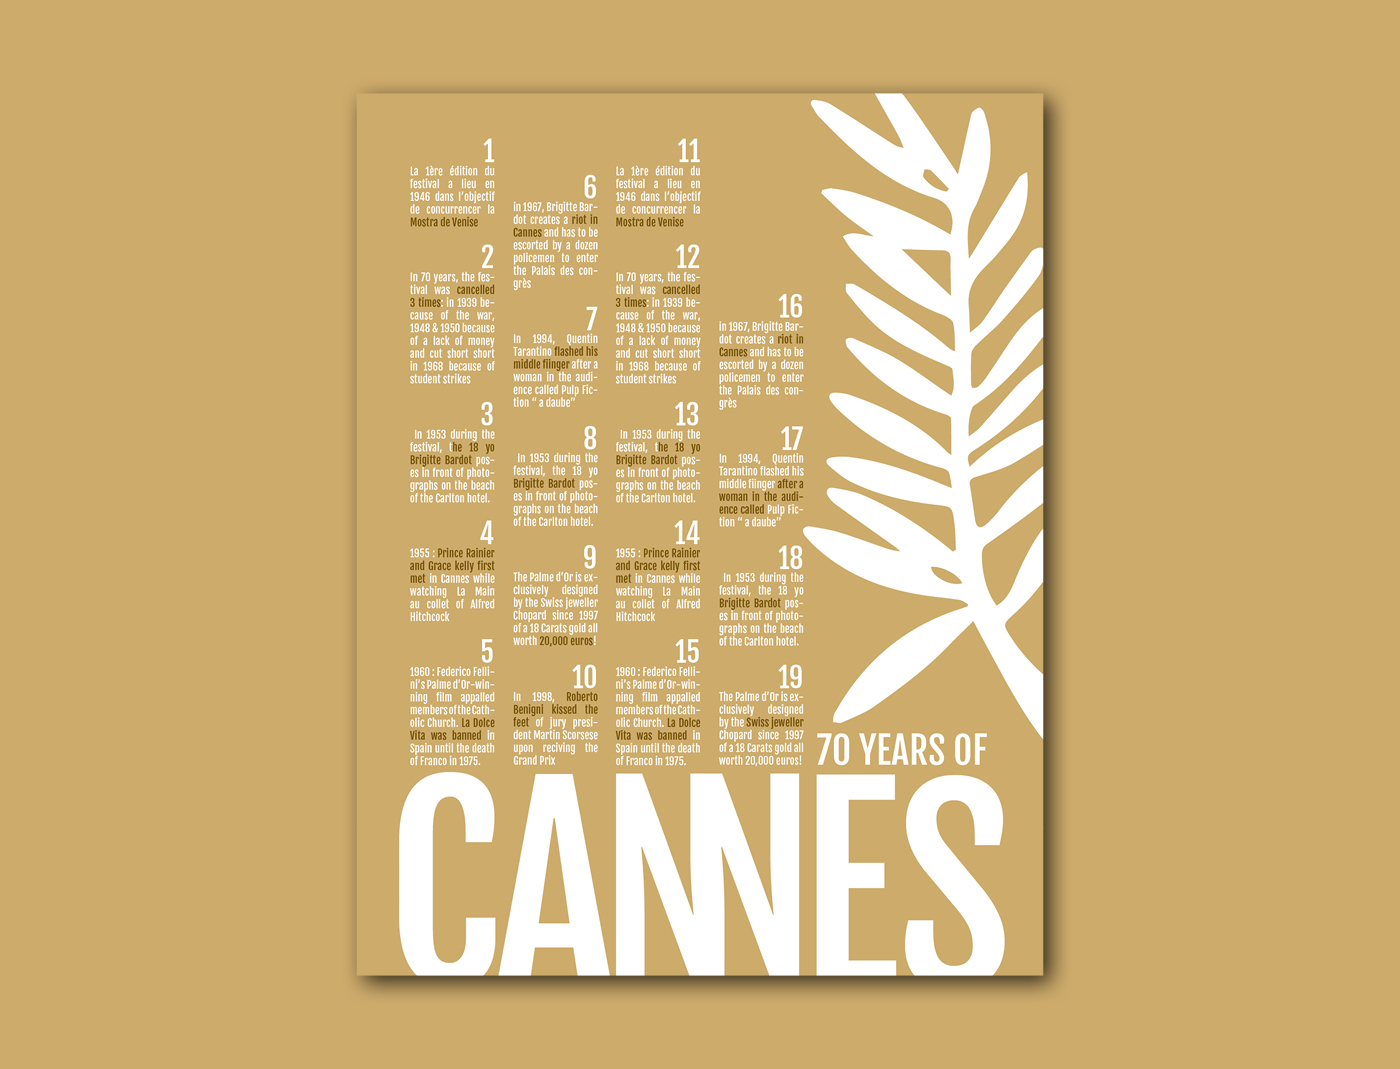 Be-Cannes_Data5